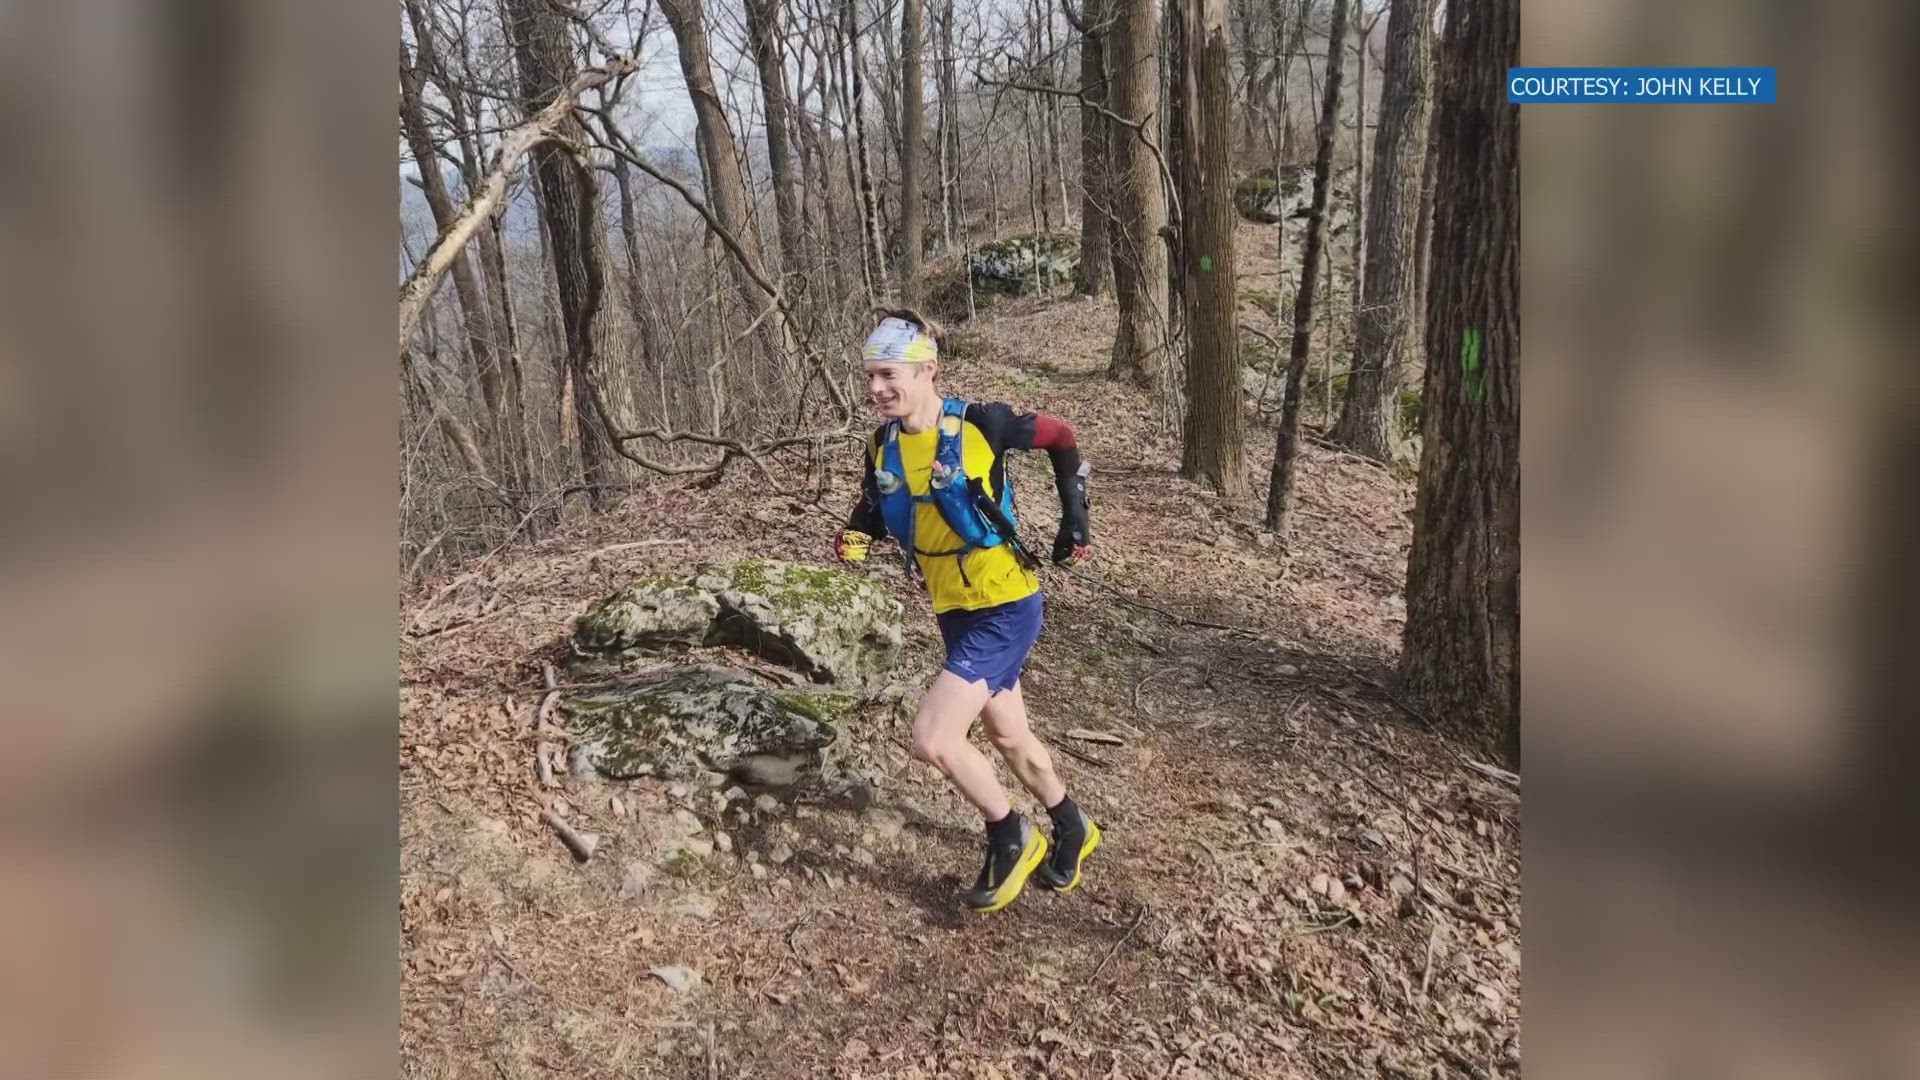 Only 15 people have ever successfully completed the Barkley Marathons. John Kelly is hoping to do it for a second time.